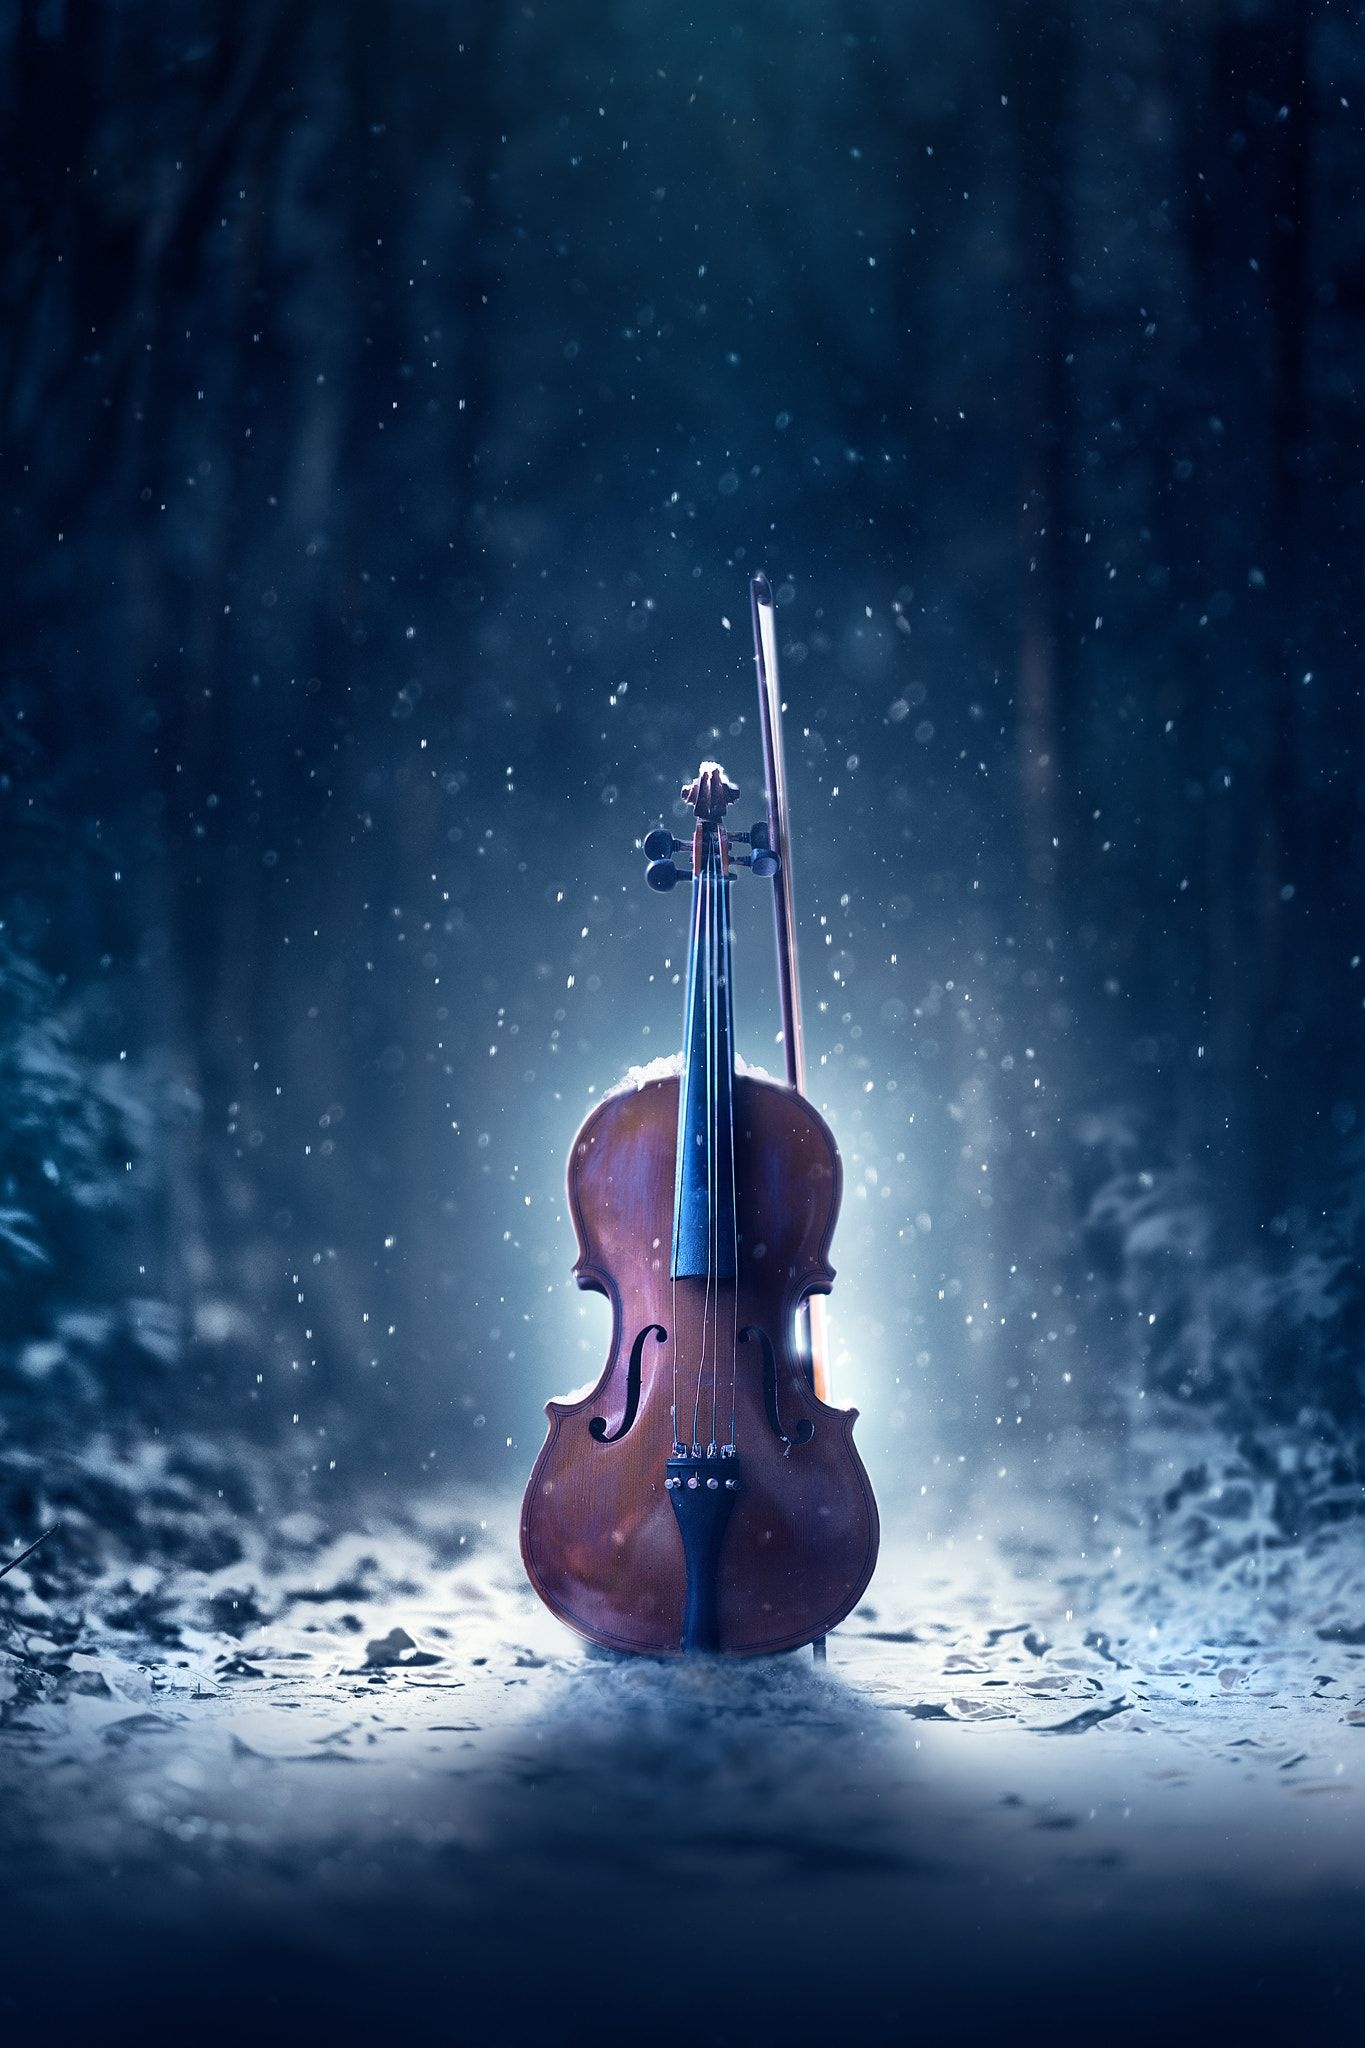 Musical Instruments: A bowed string instrument, Classical violin playing, A fiddling stick. 1370x2050 HD Wallpaper.